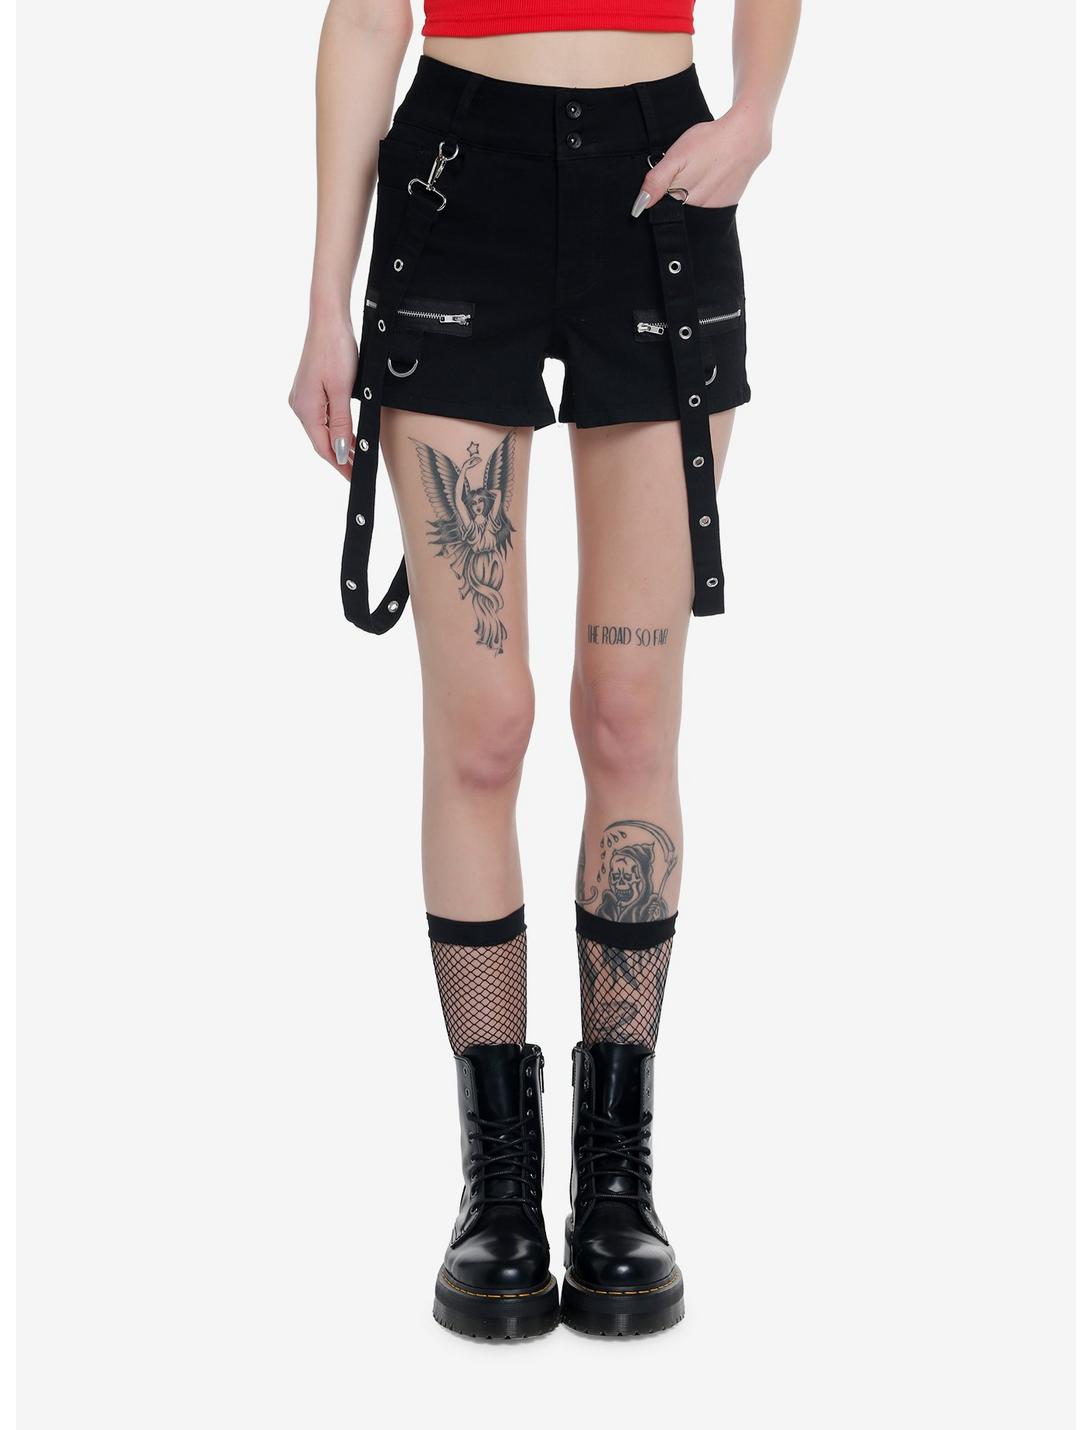 Black High-Waisted Super Skinny Shorts With Suspenders, BLACK, hi-res